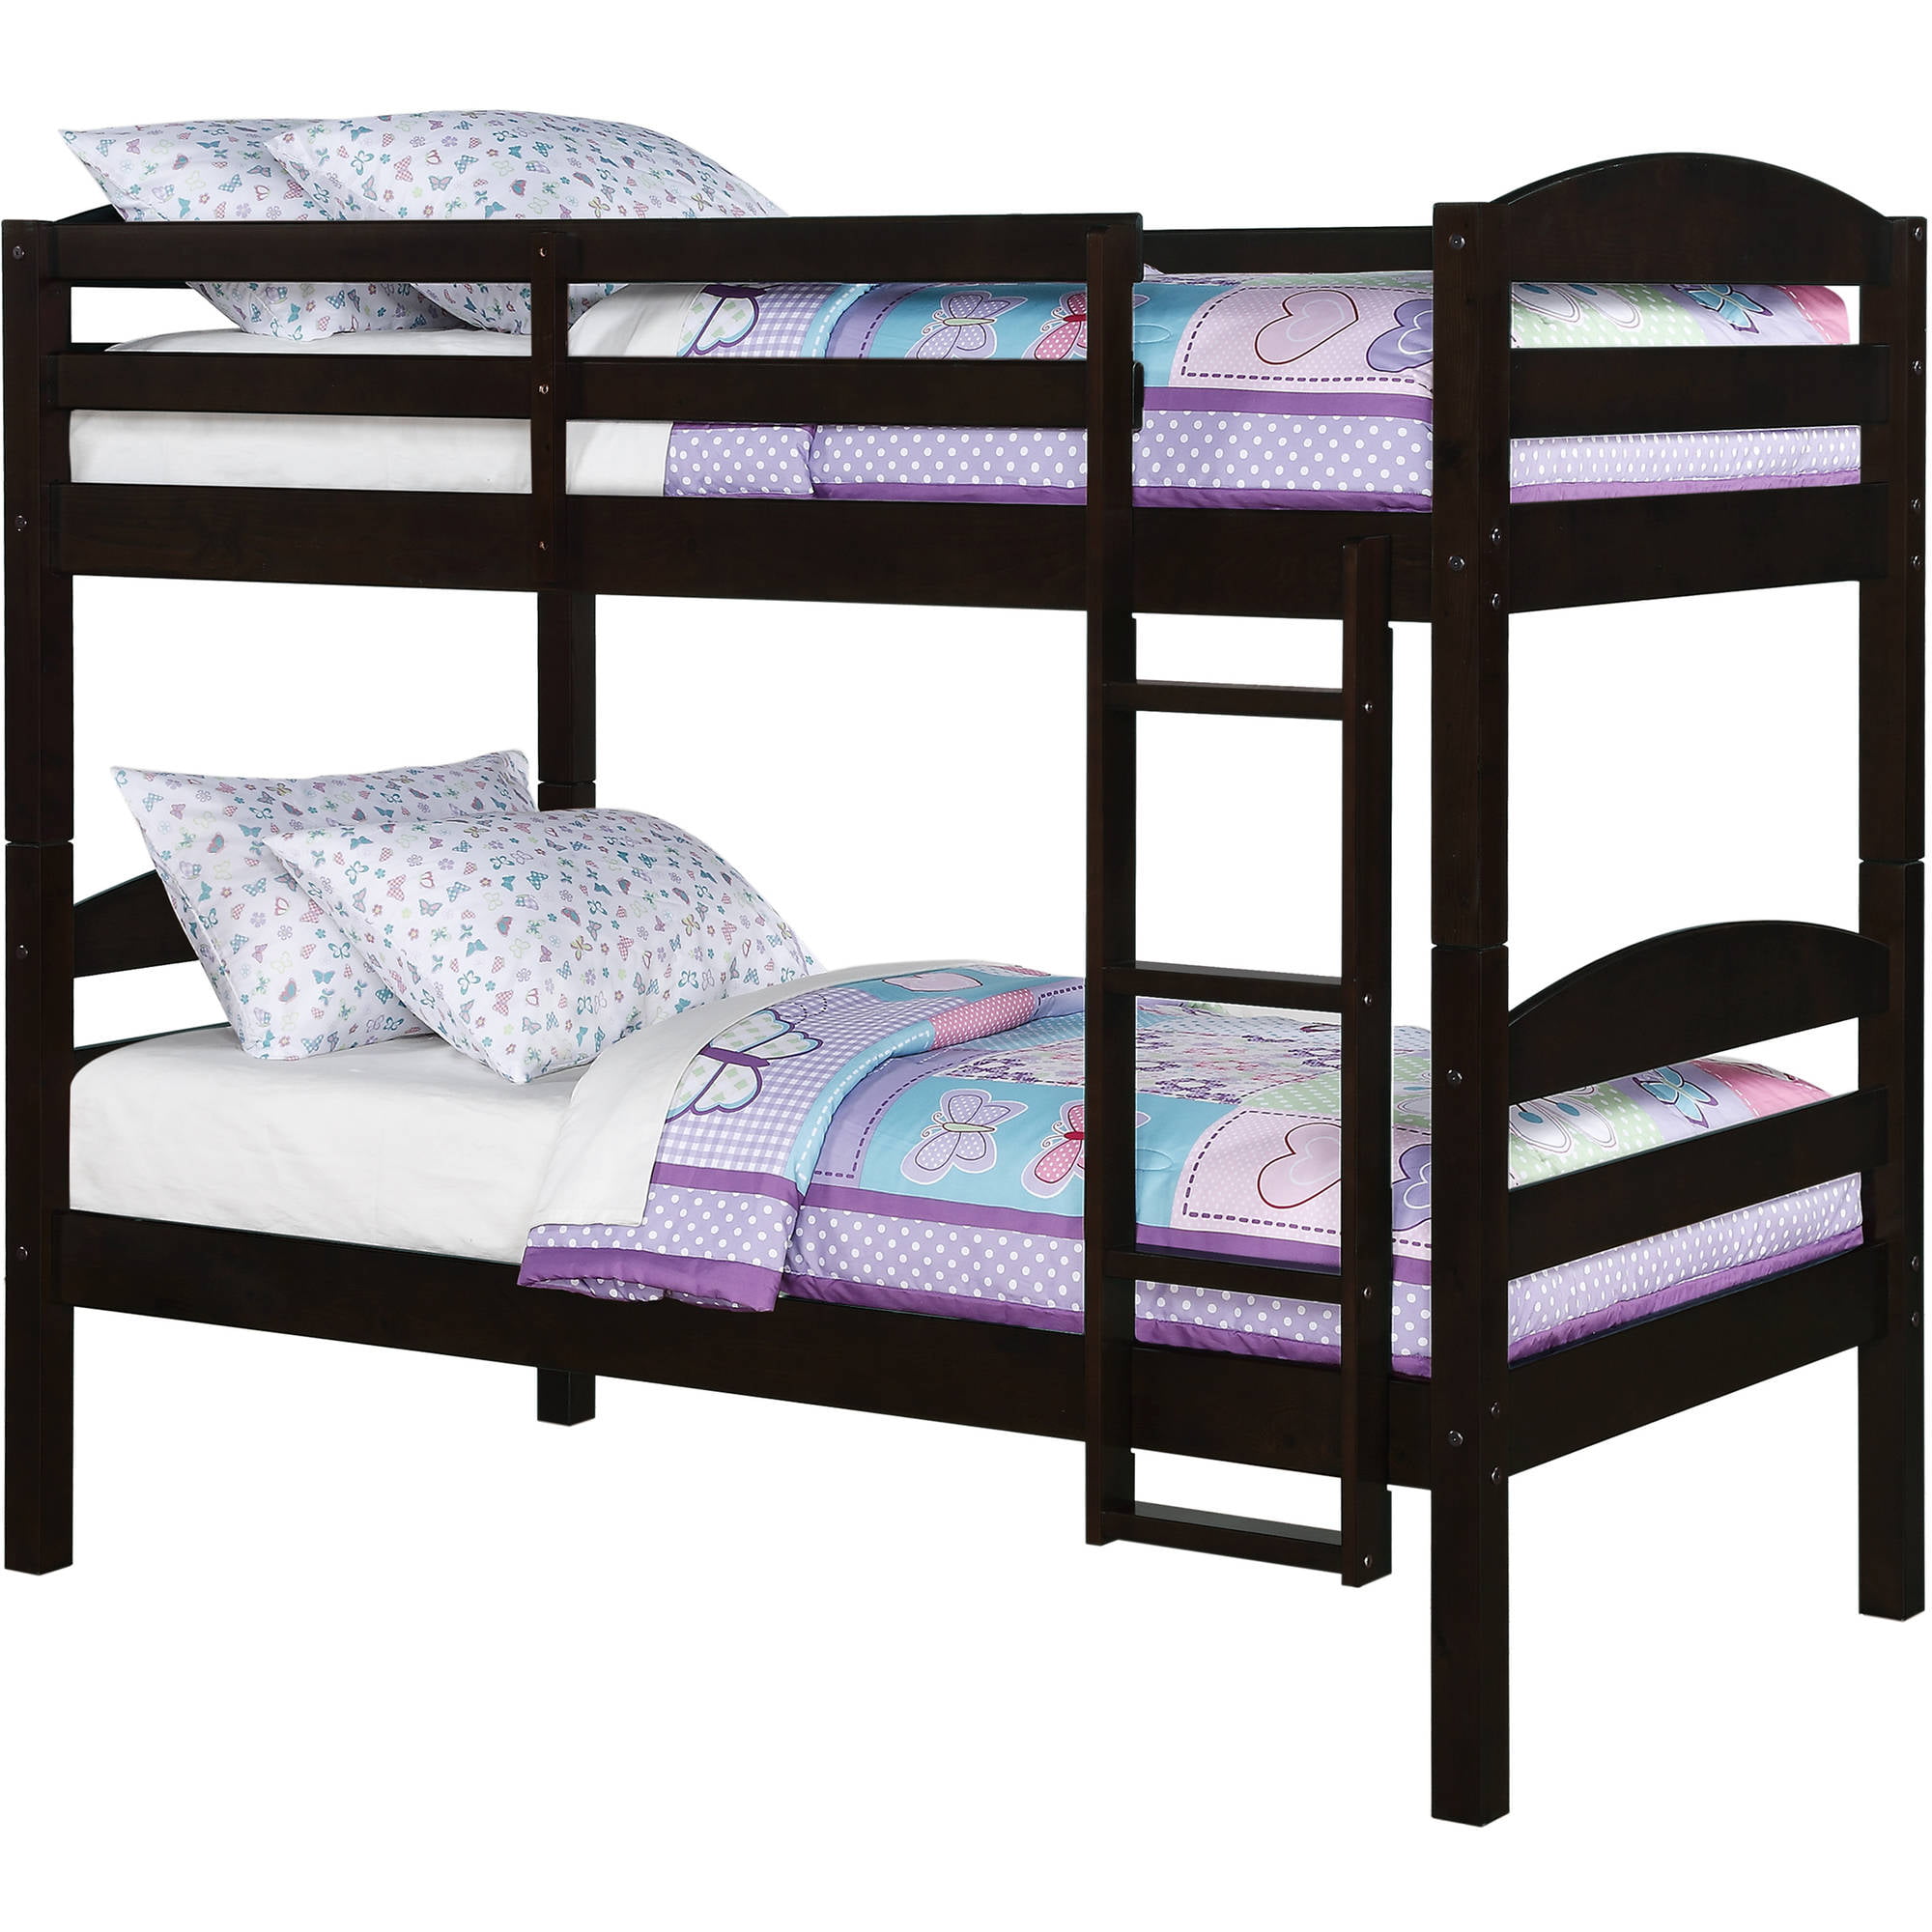 How do you check the safety of bunk beds for sale by owner?